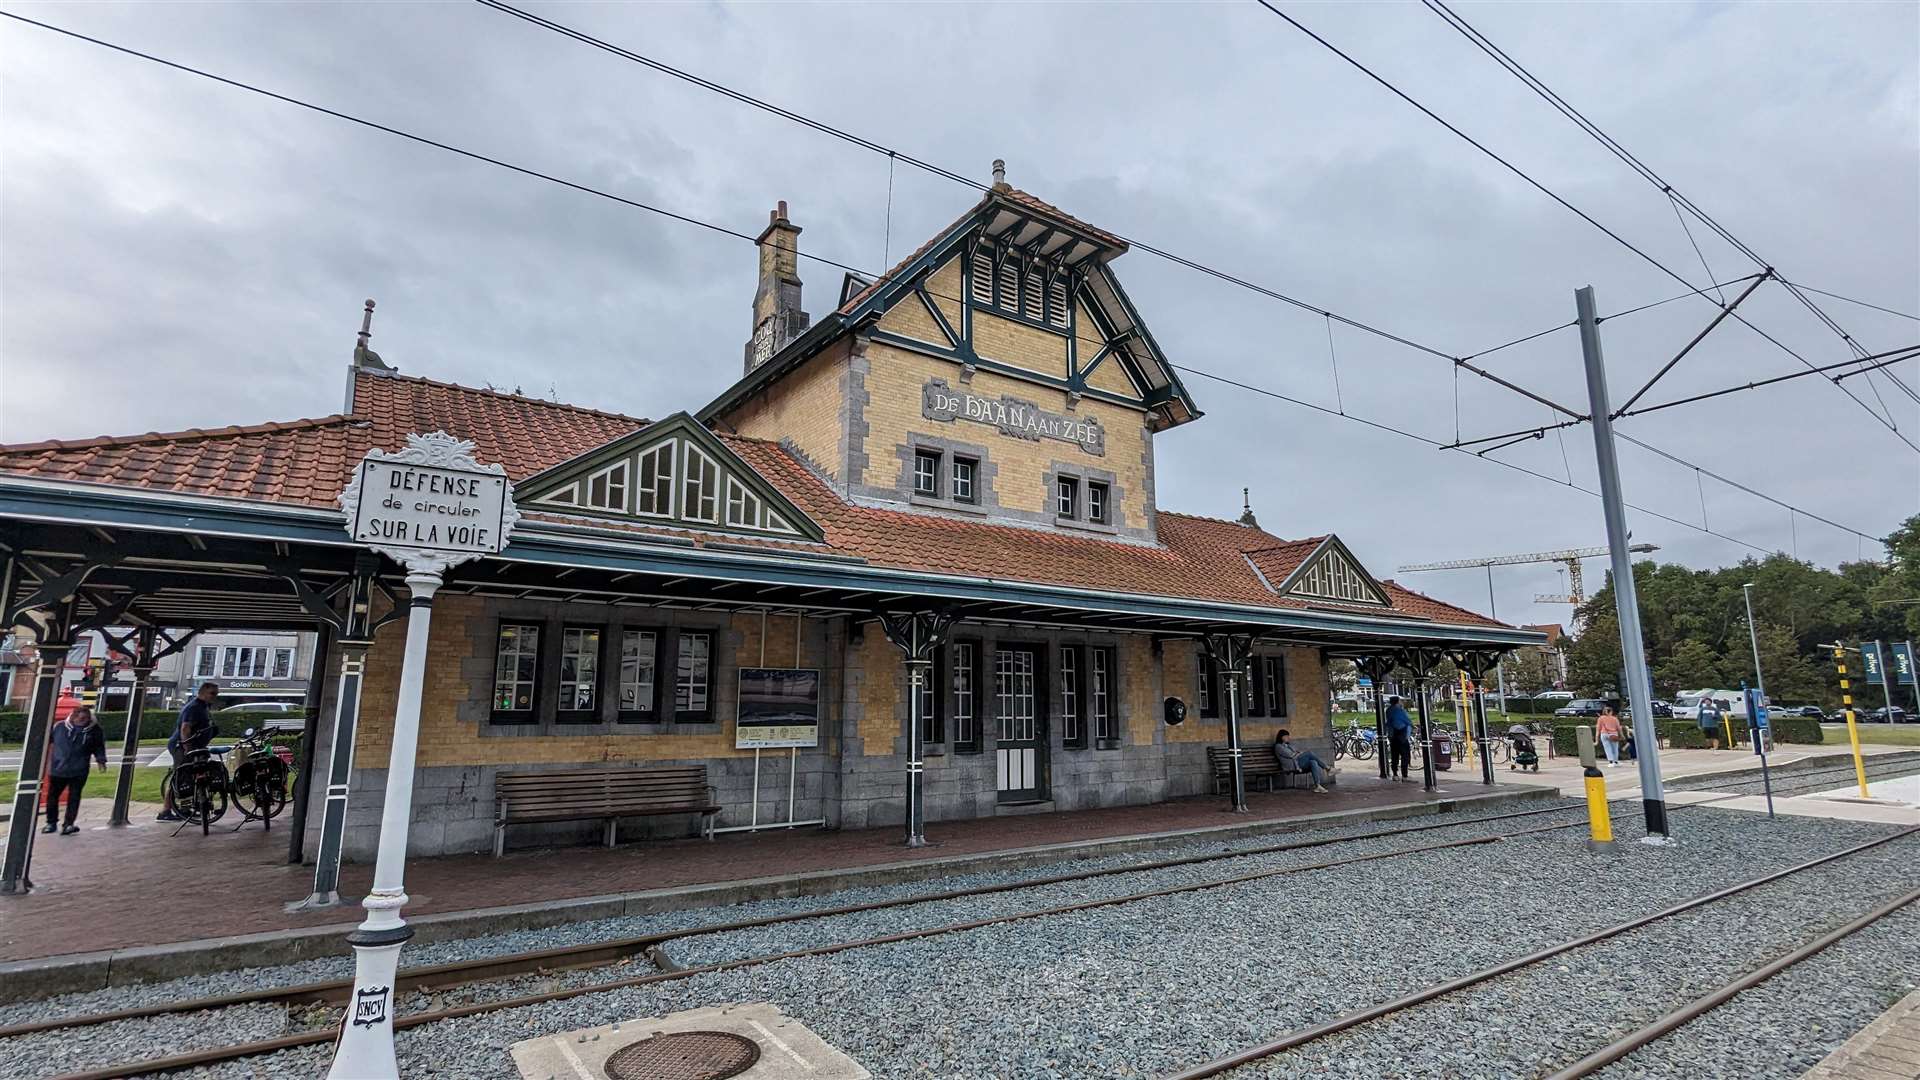 The historic coast tram station in the pretty resort town of De Haan